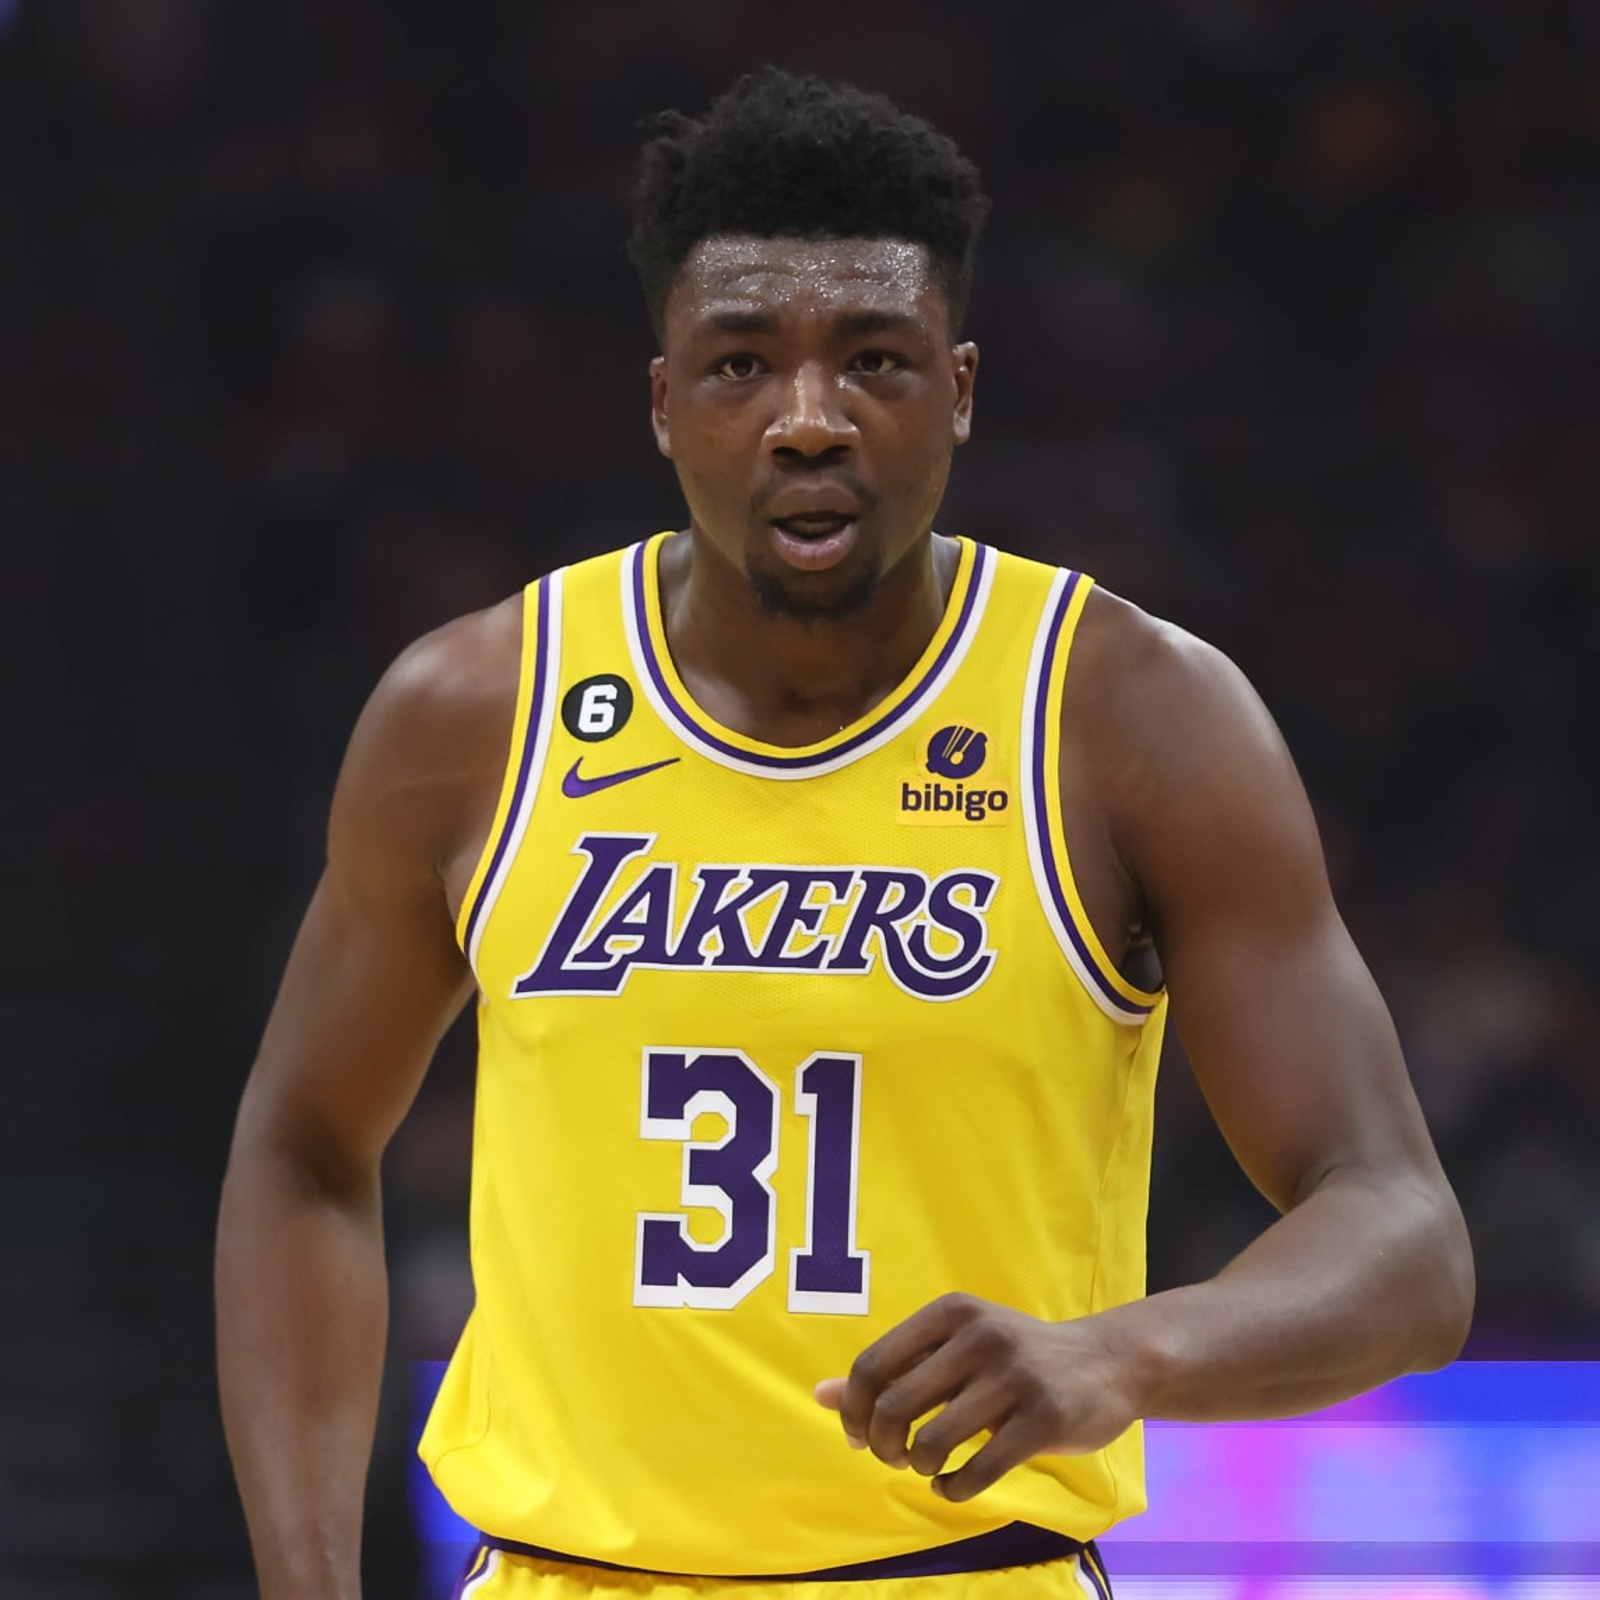 The Lakers have found a keeper in Thomas Bryant